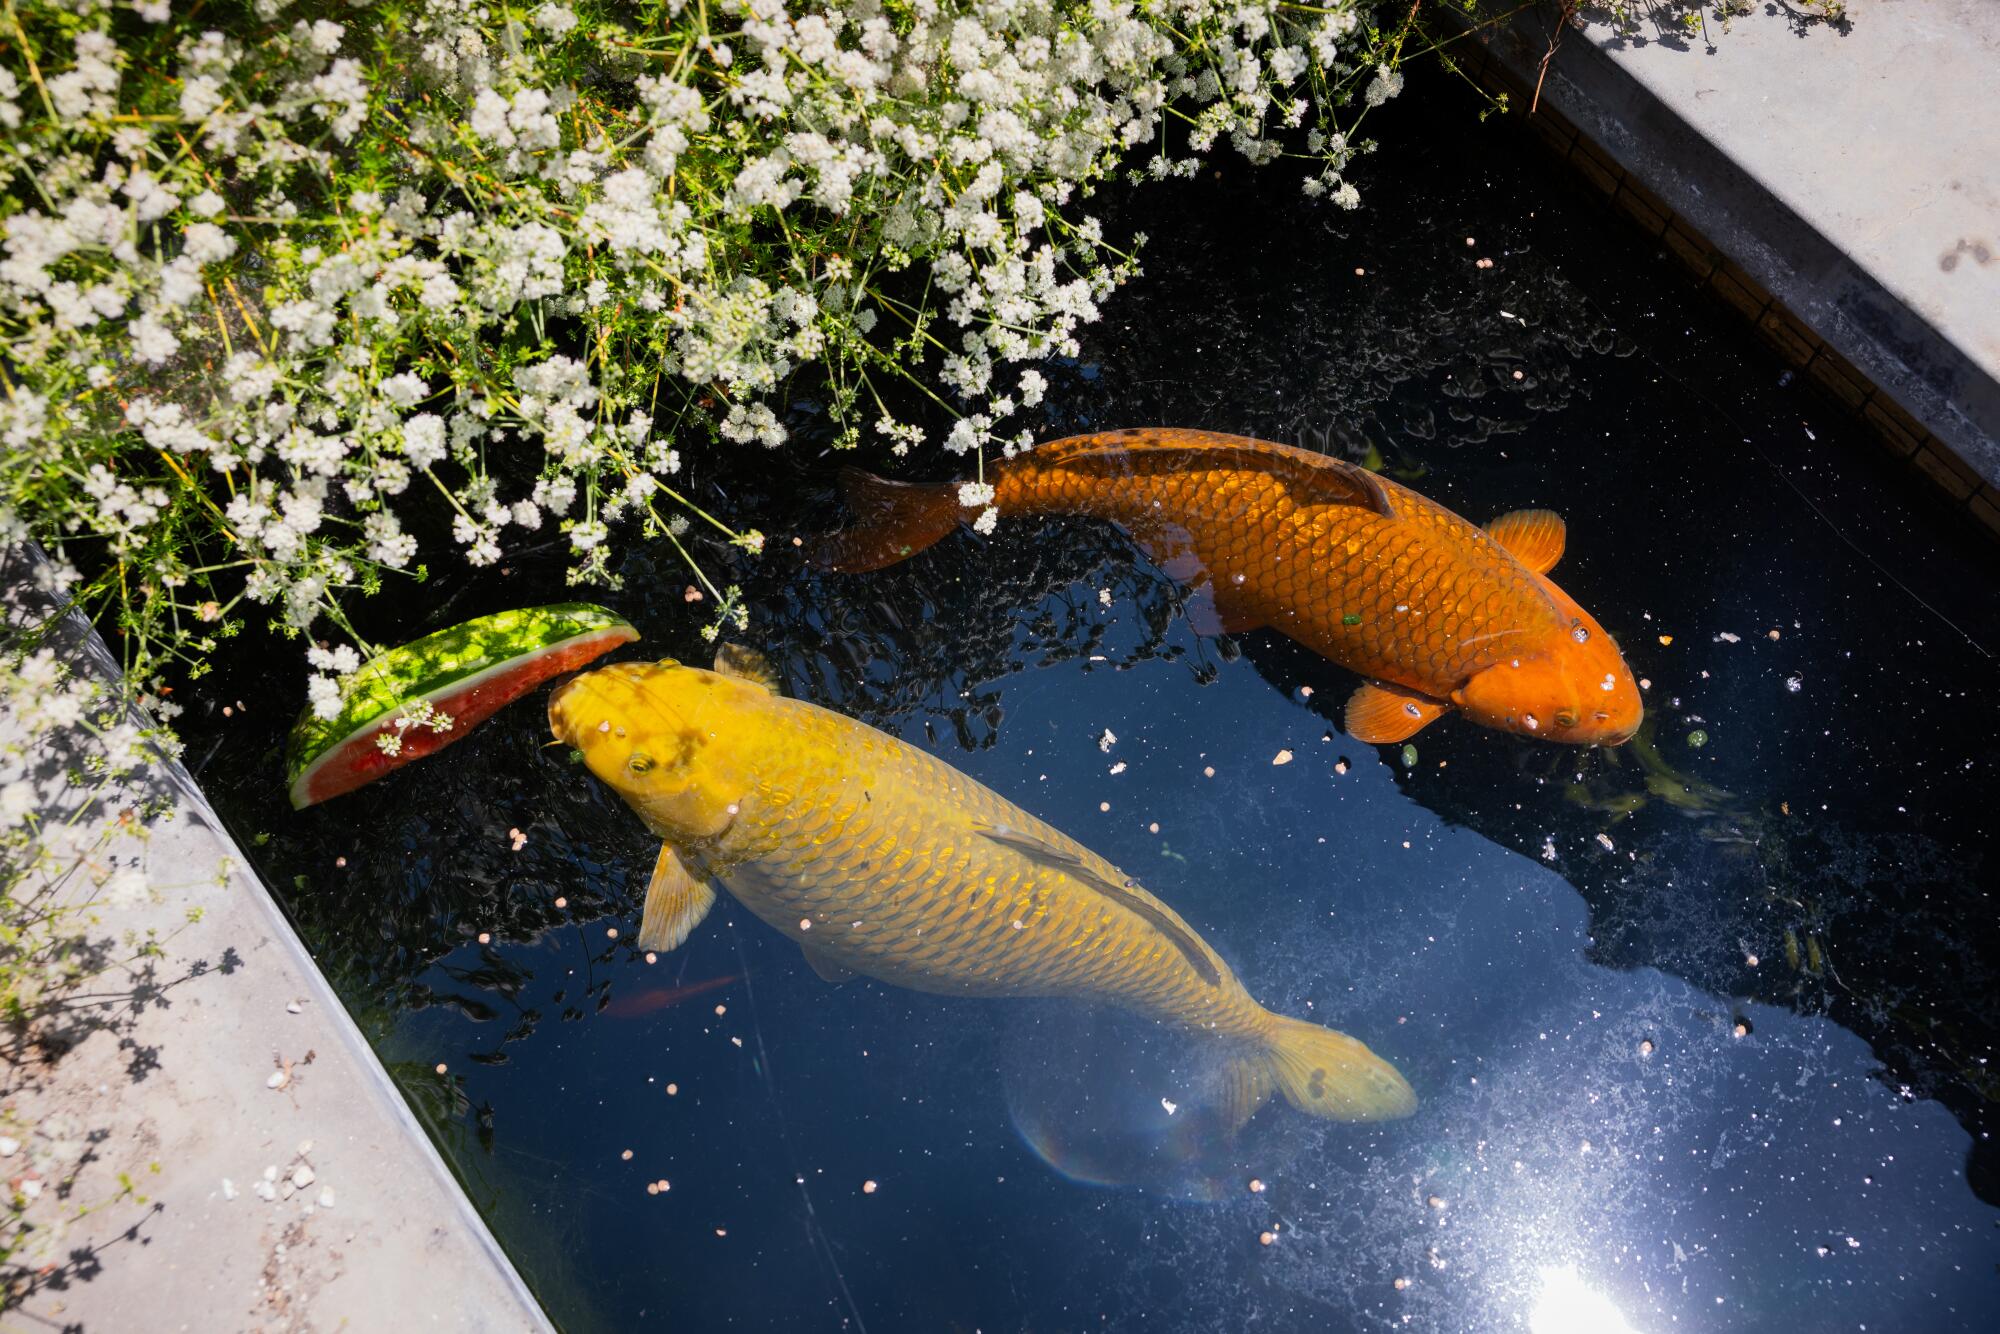 Two koi fish in a pond, one about to bite into some floating watermelon.